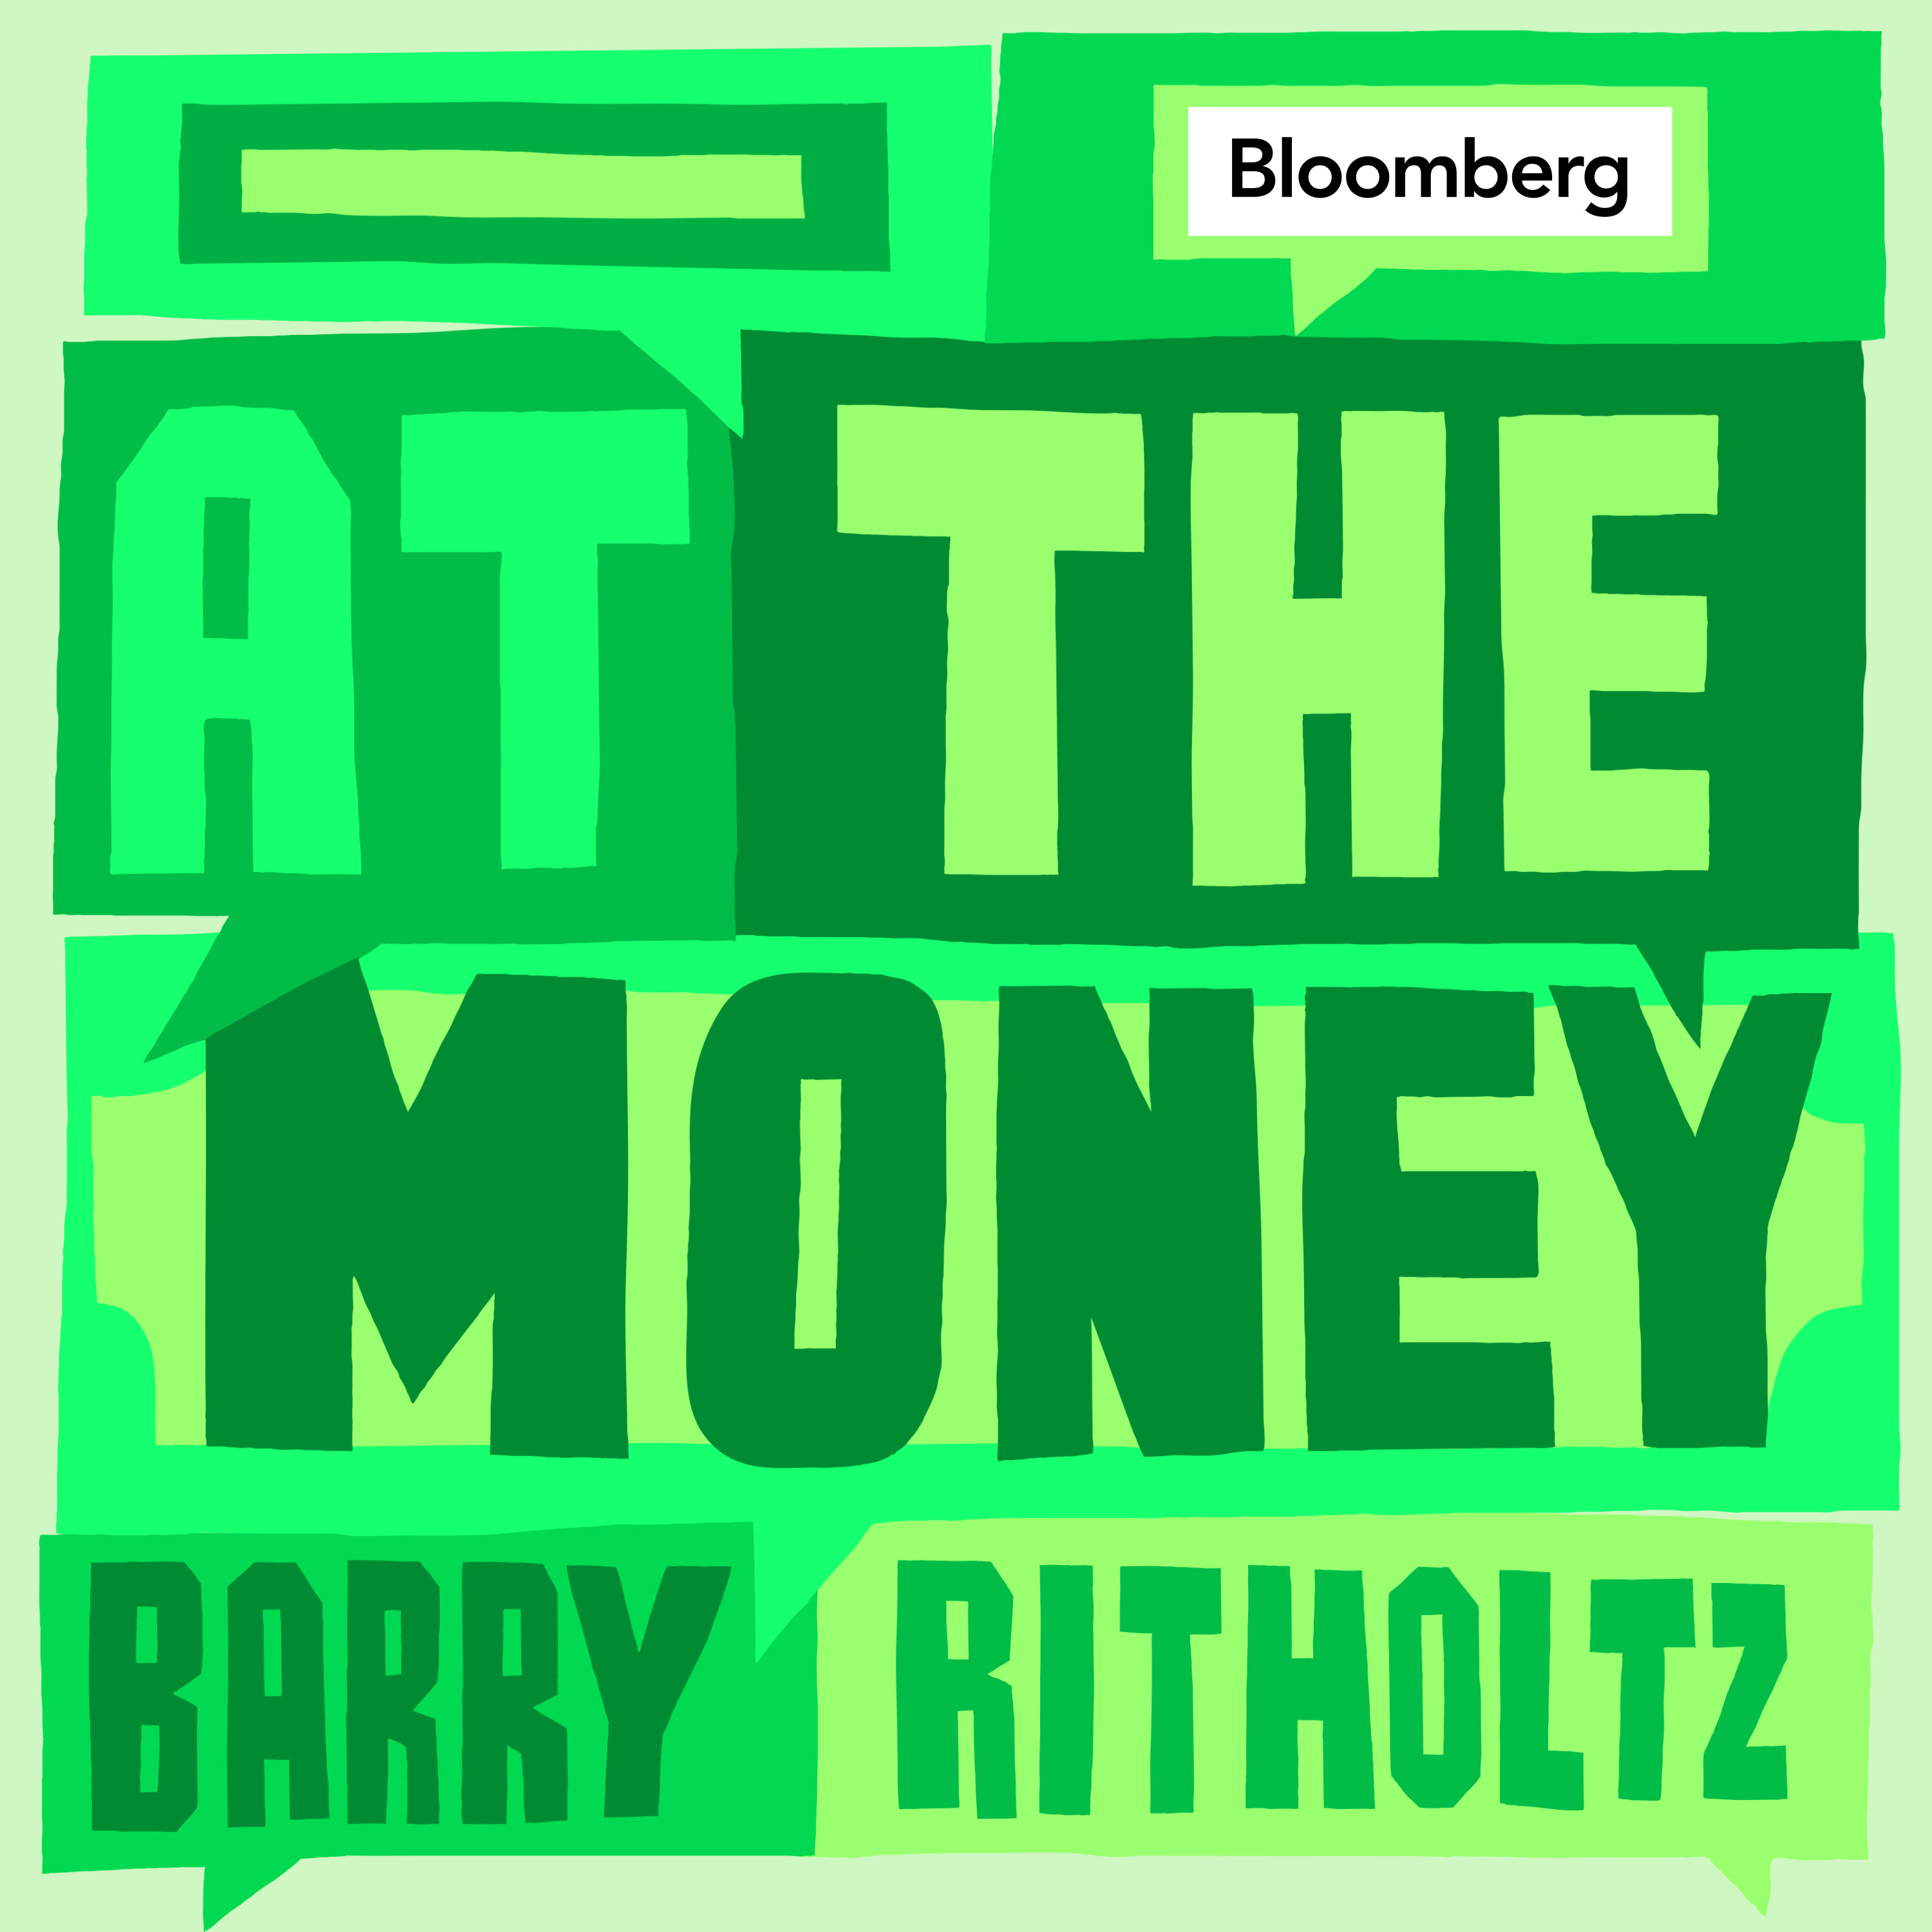 At The Money: Managing a Portfolio in a Higher Rate Environment